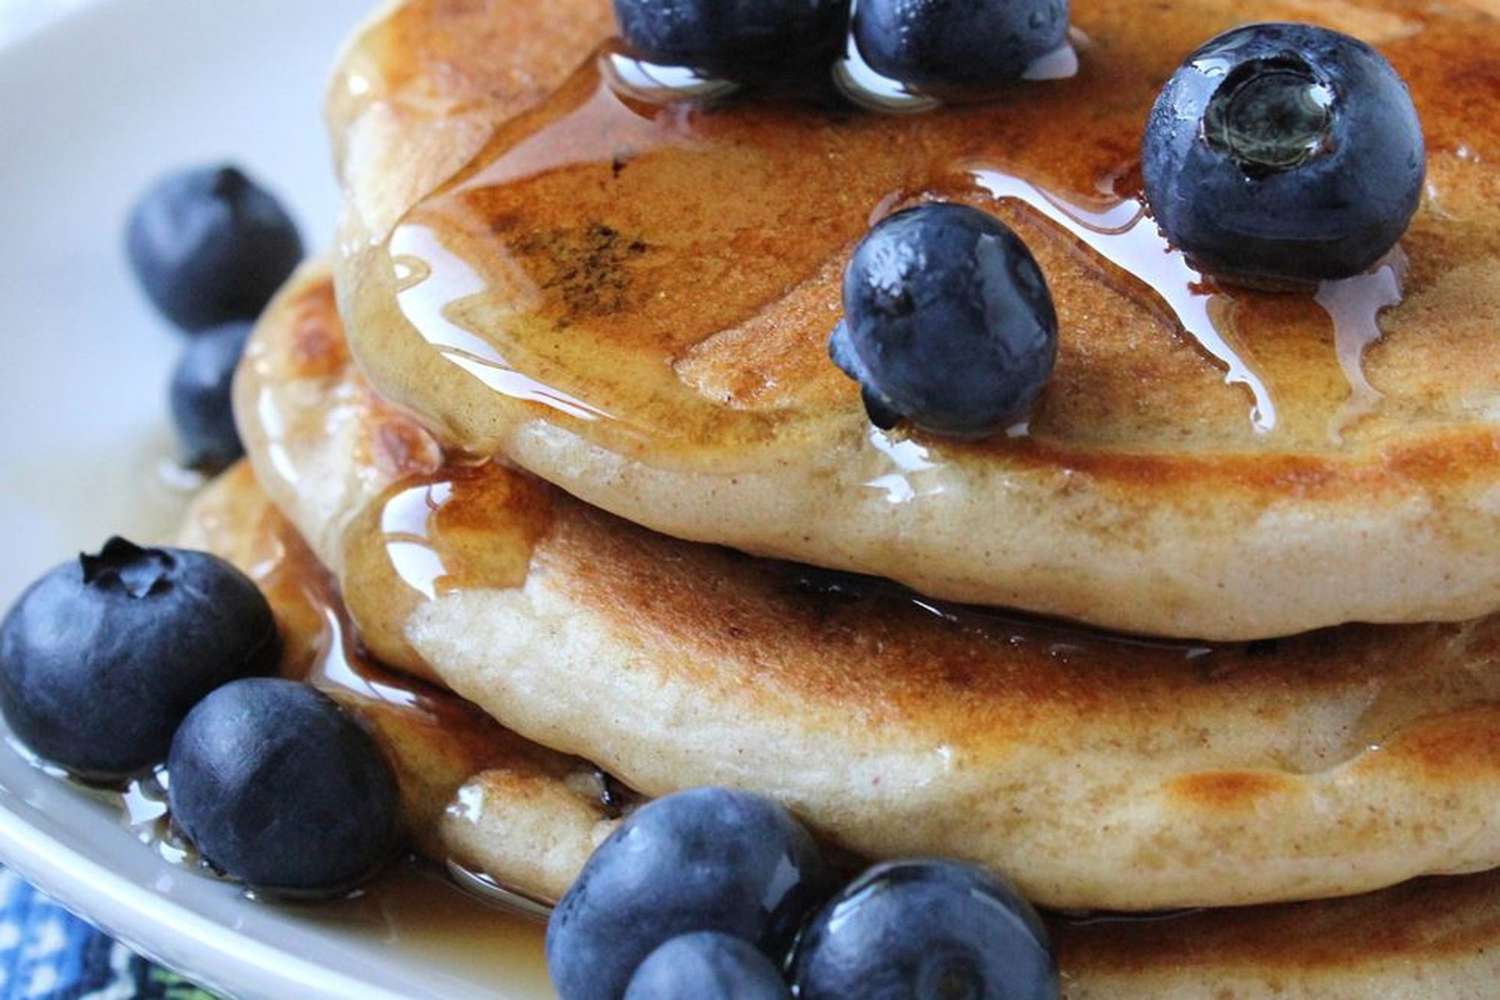 Todd's Famous Blueberry Pancakes